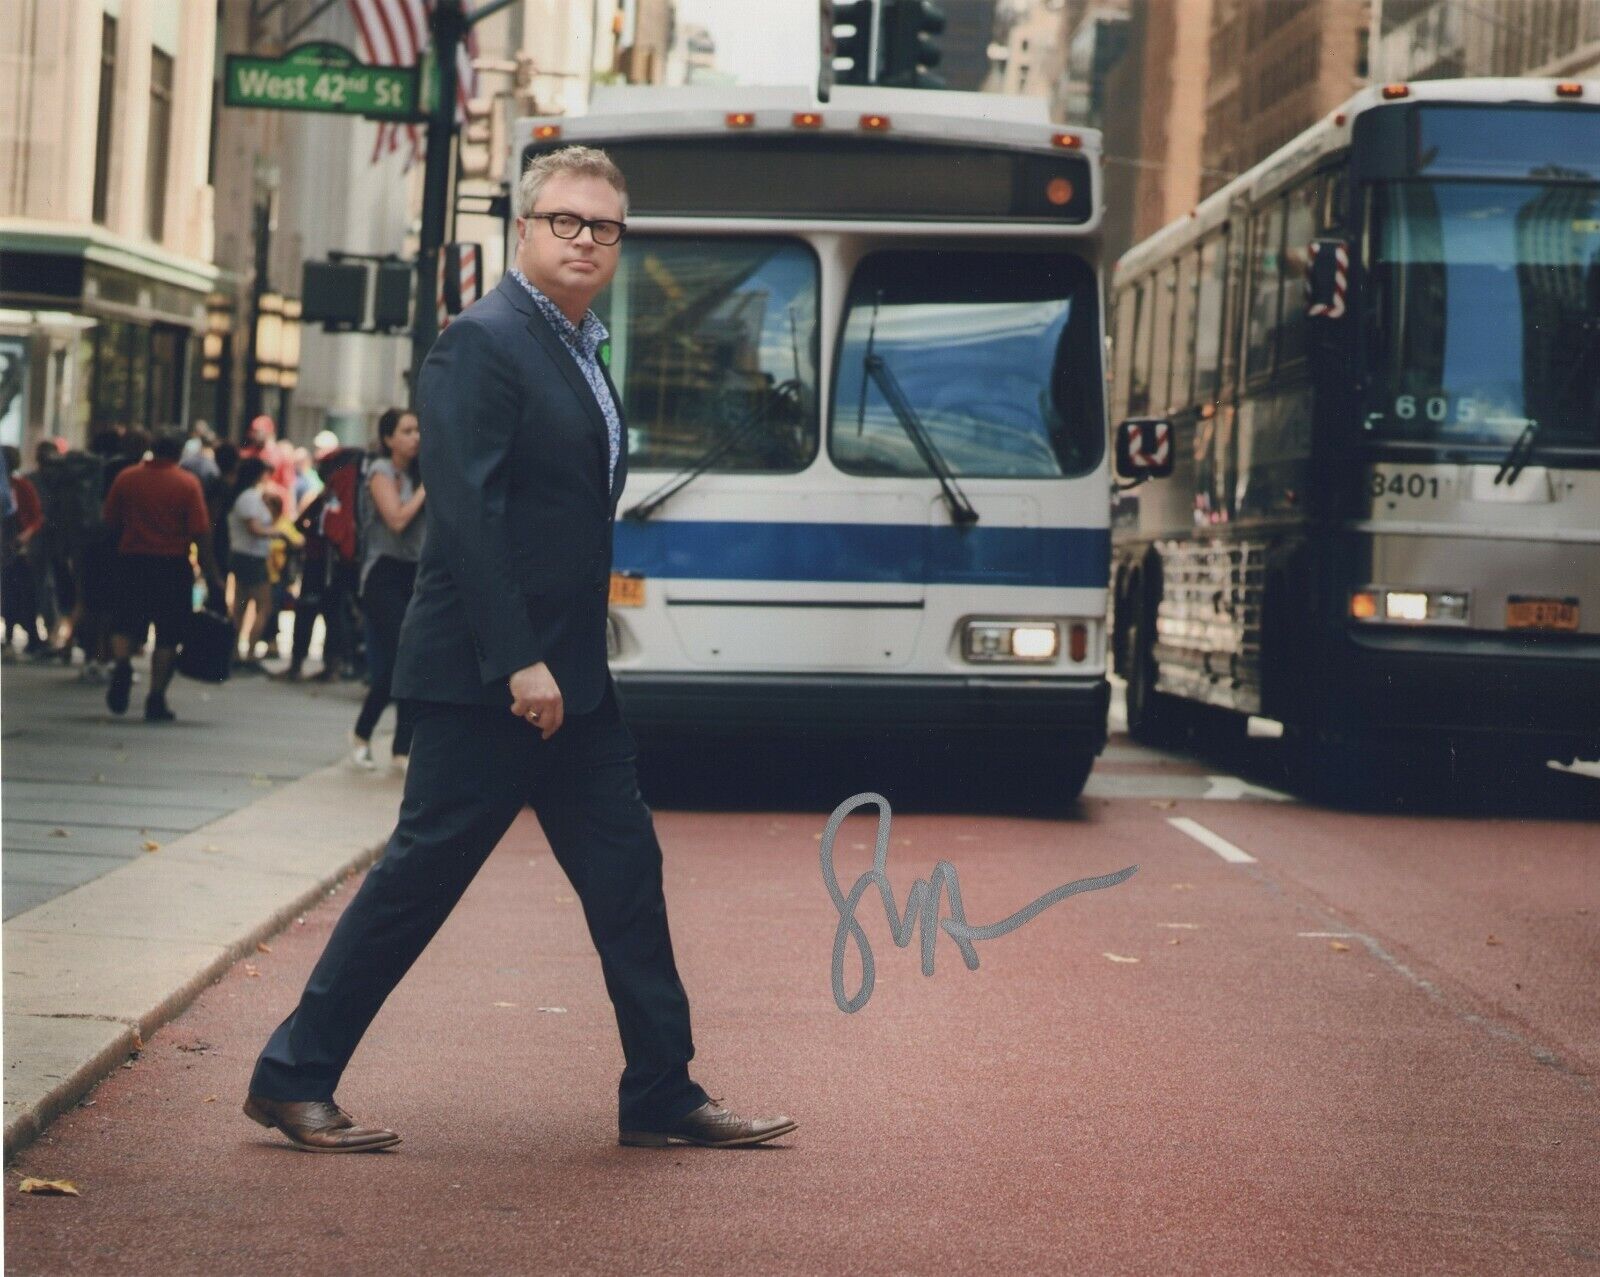 STEVEN PAGE SIGNED AUTOGRAPH 8X10 Photo Poster painting BARENAKED LADIES PROOF #2